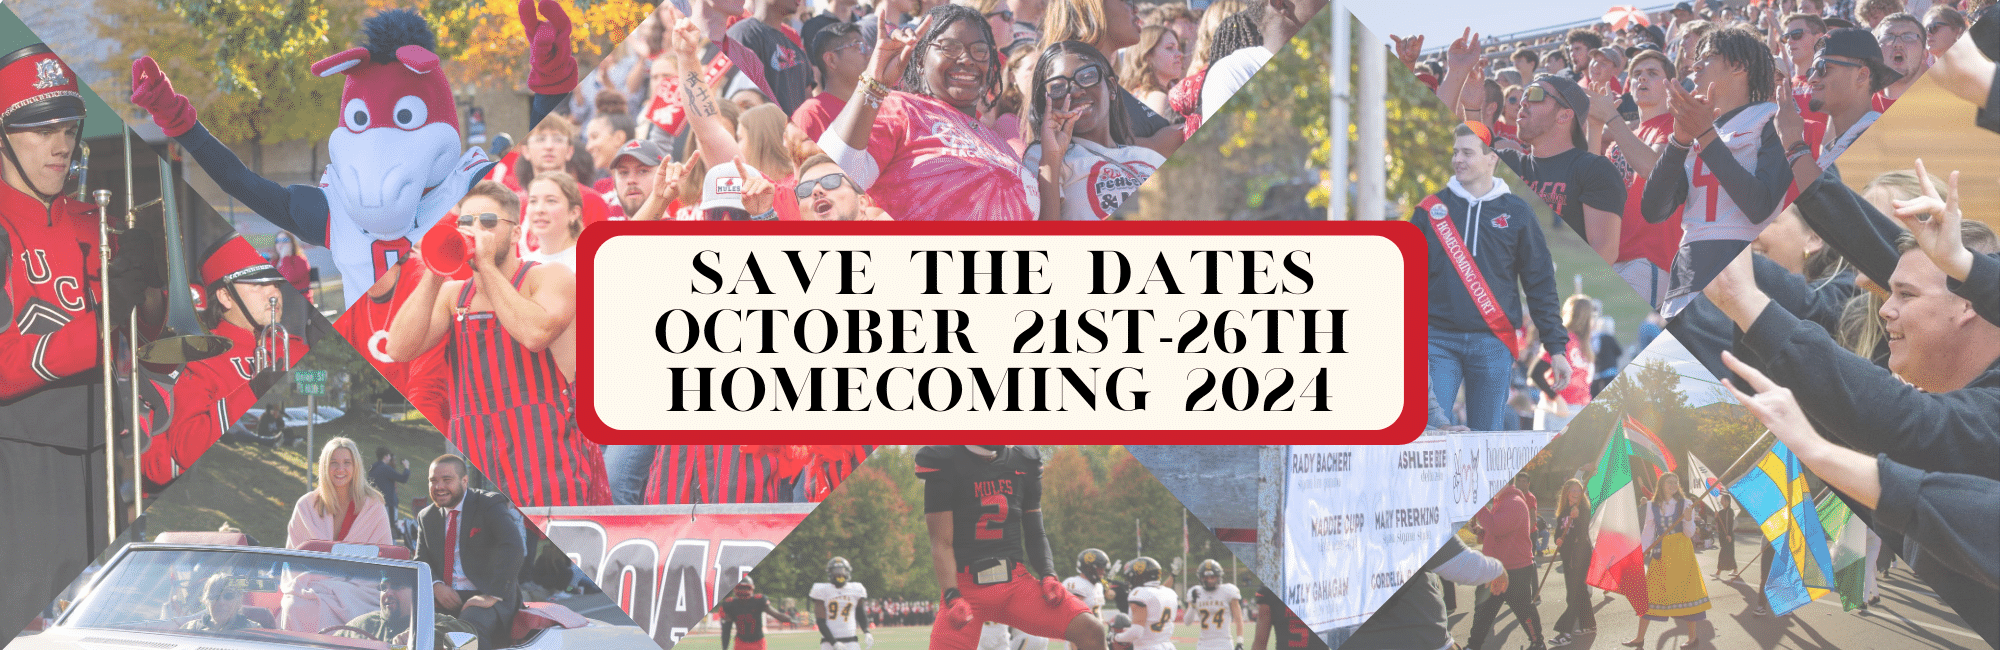 announcement of homecoming 2024 dates - October 21-26 with spirited photos